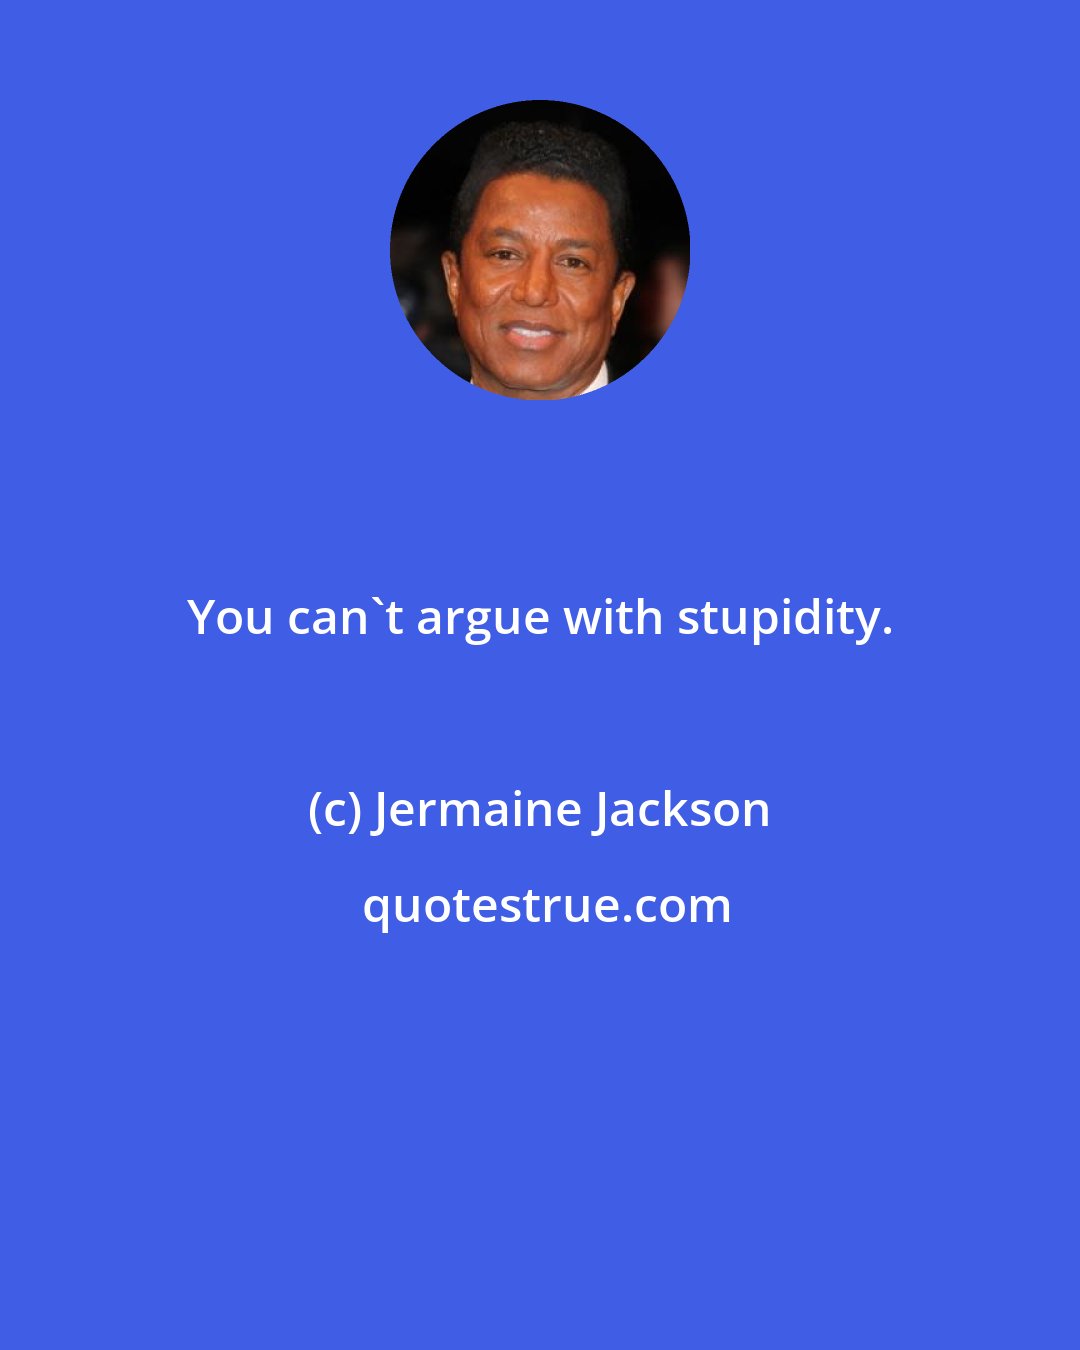 Jermaine Jackson: You can't argue with stupidity.